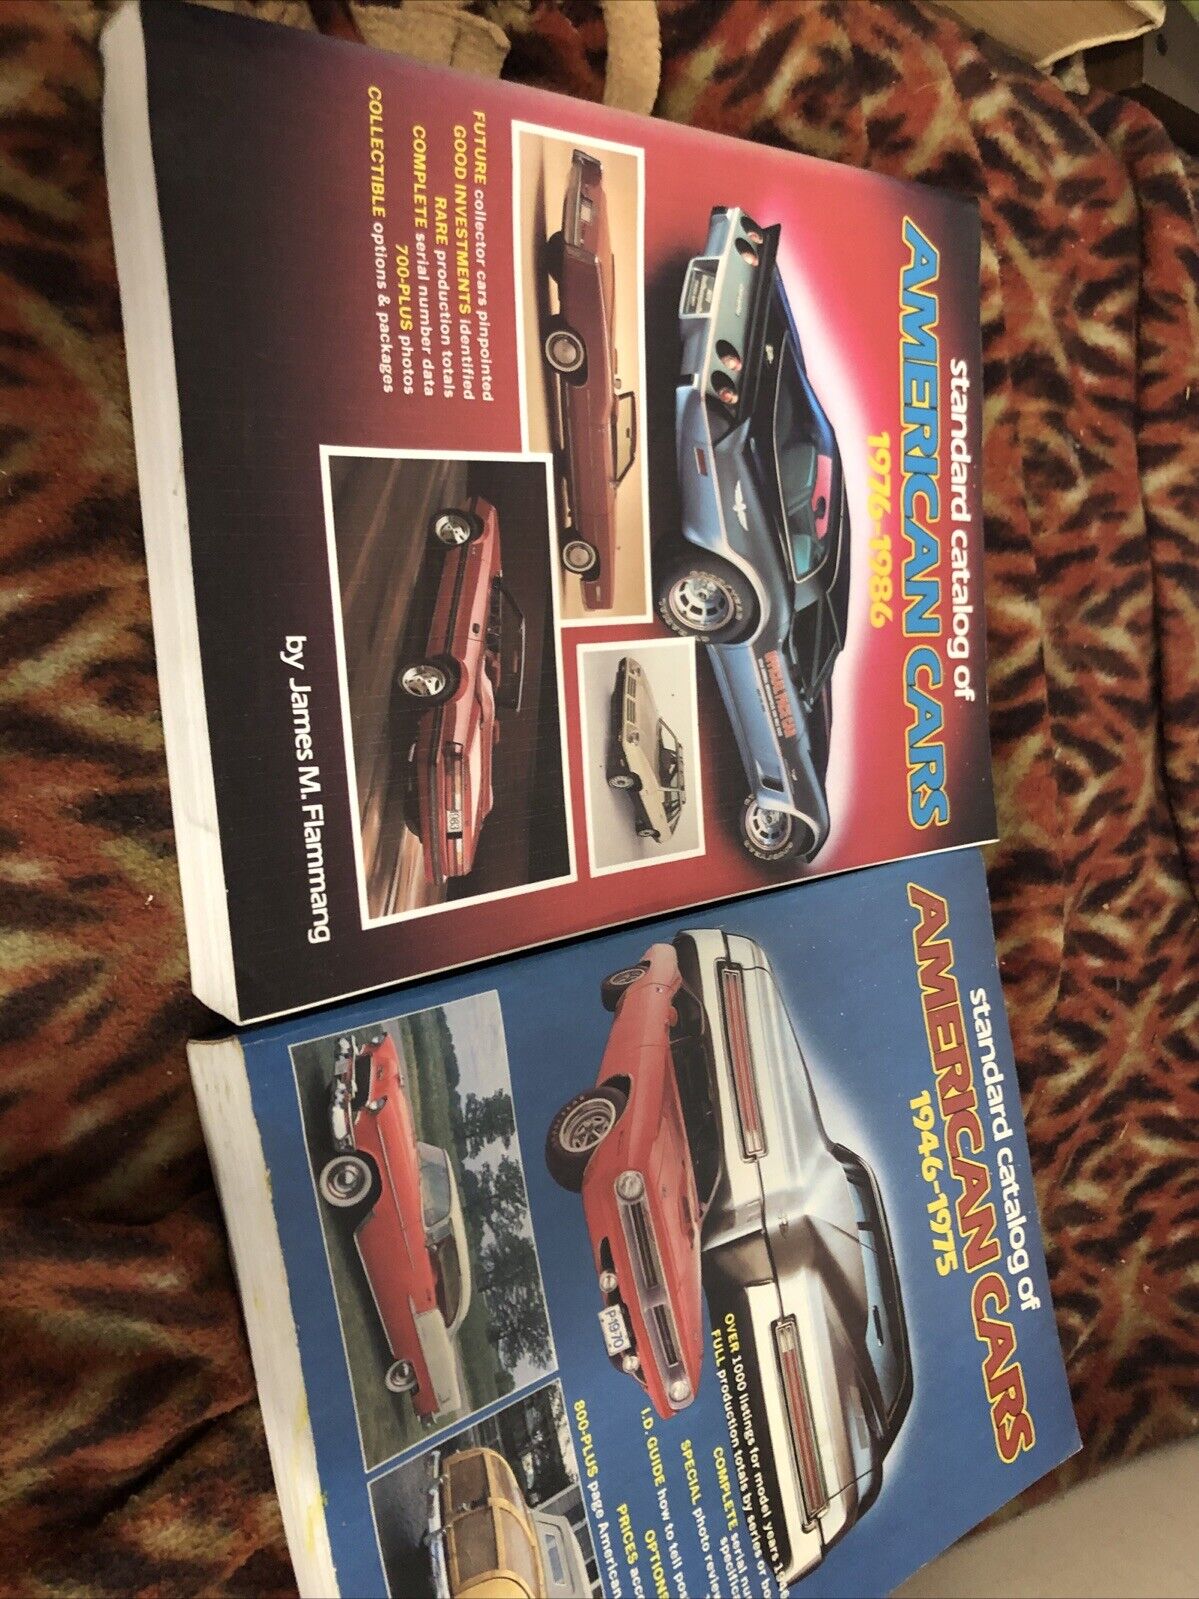 Standard Catalog American Cars 1946-1986 2 Vol Lot Muscle Cars Classic Vintage